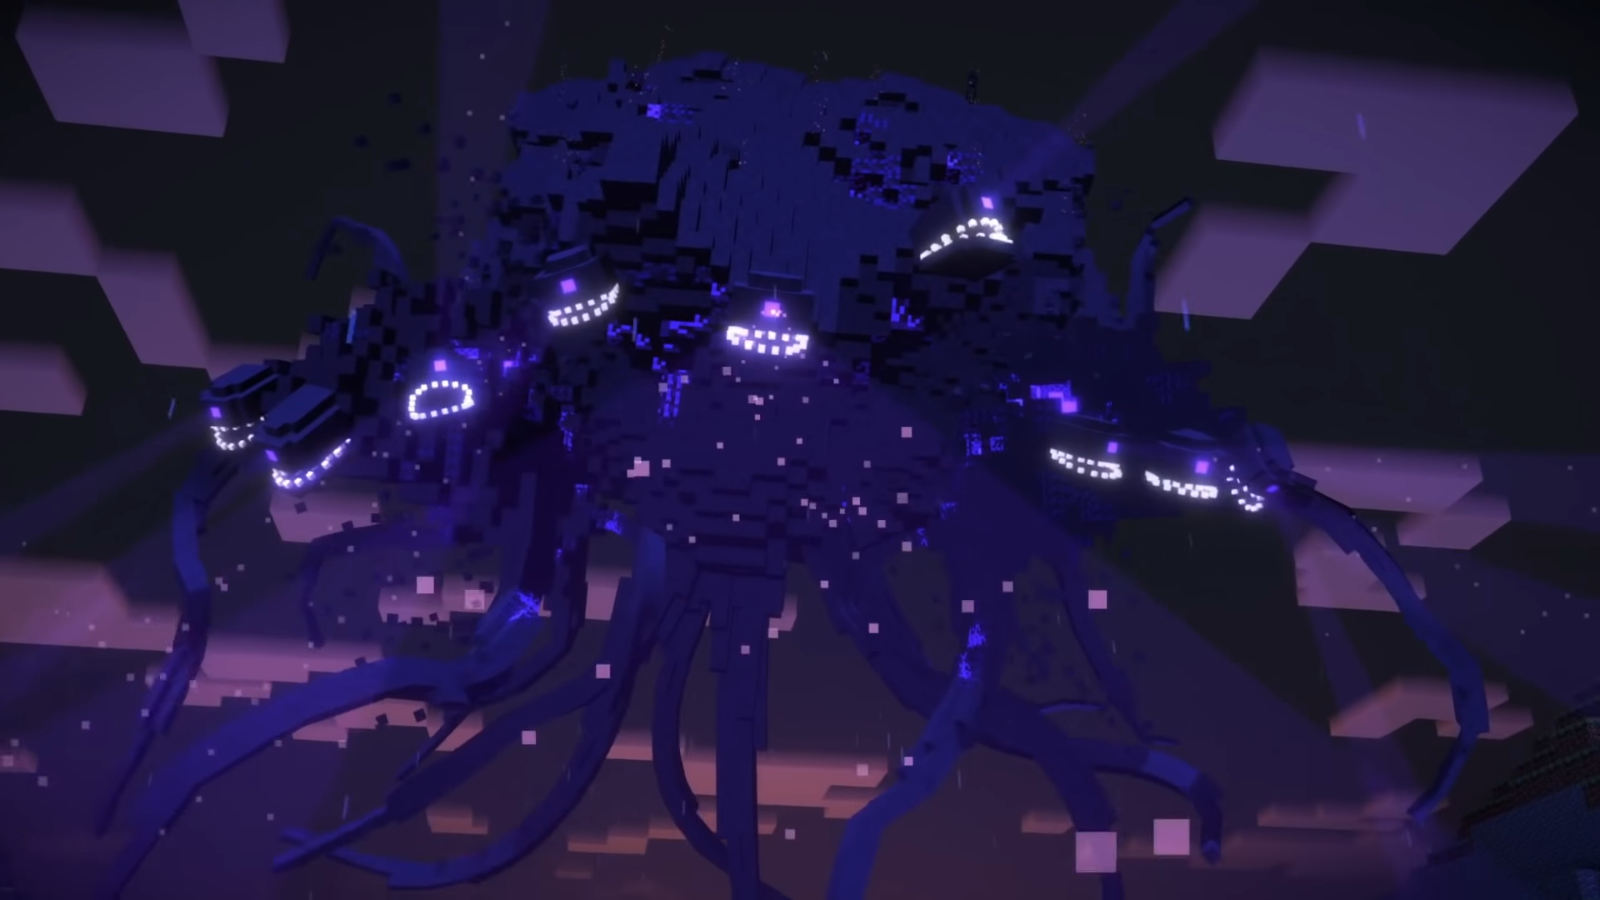 Repeating Wither Storm Phase 1 - 3D model by SBLExt- RWS (@SBLExt-RWS)  [e2acde1]